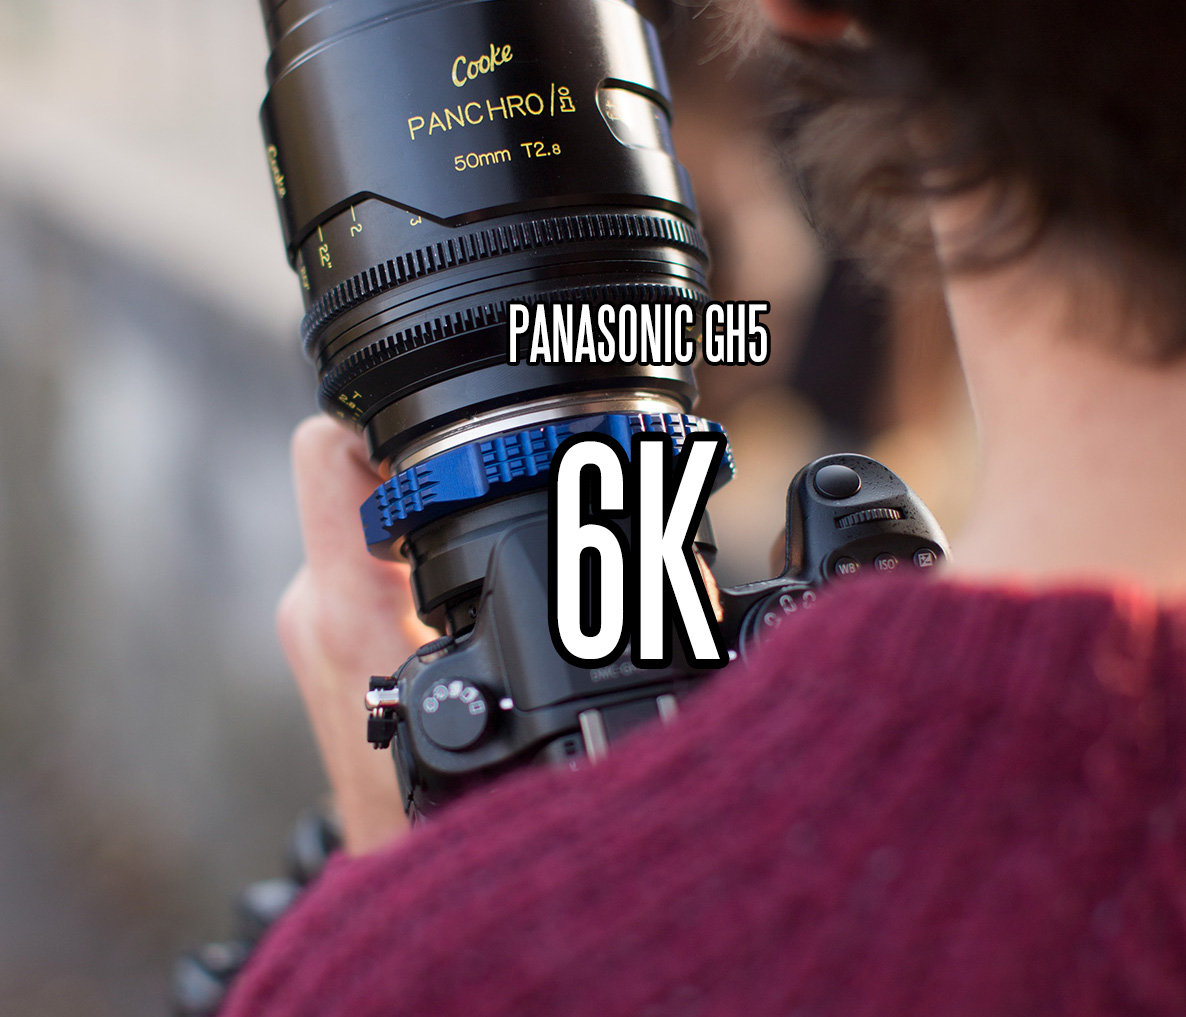 spons wacht Specificiteit Very exciting if true - Panasonic GH5 sounds like a bomb - including 6K  from 20MP sensor - but something does not add up! - EOSHD.com - Filmmaking  Gear and Camera Reviews